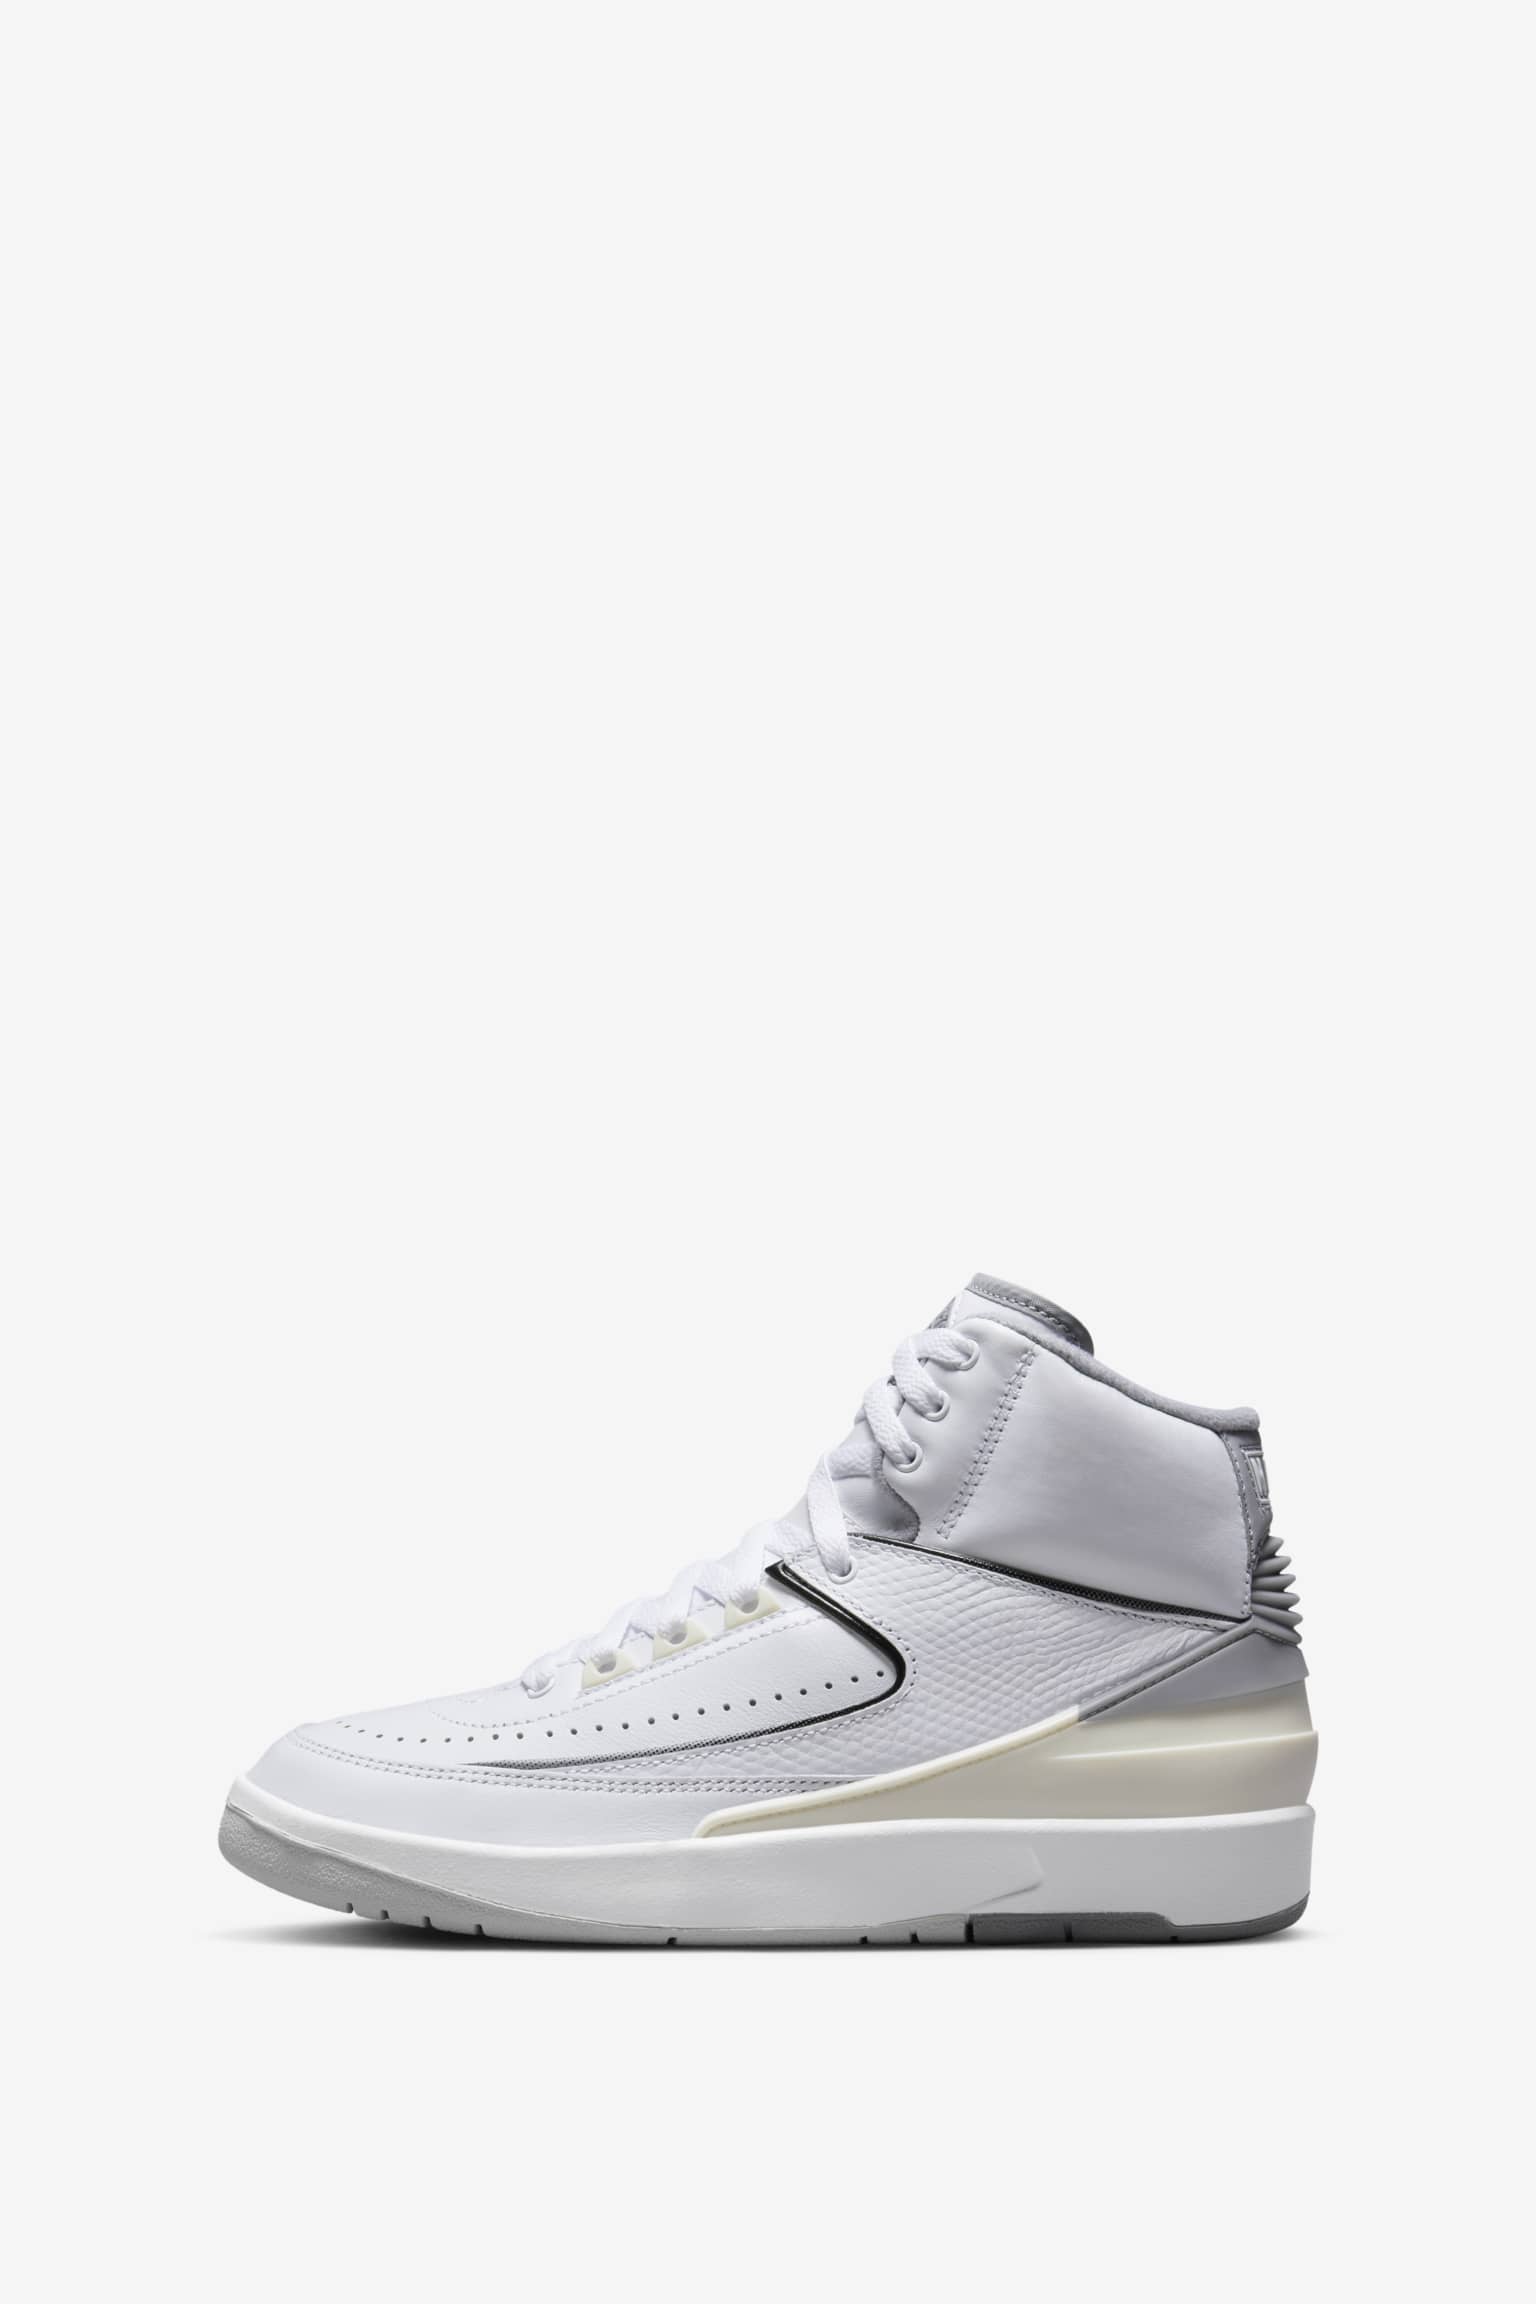 Air Jordan 2 'White and Cement Grey' (DR8884-100). Nike SNKRS GB